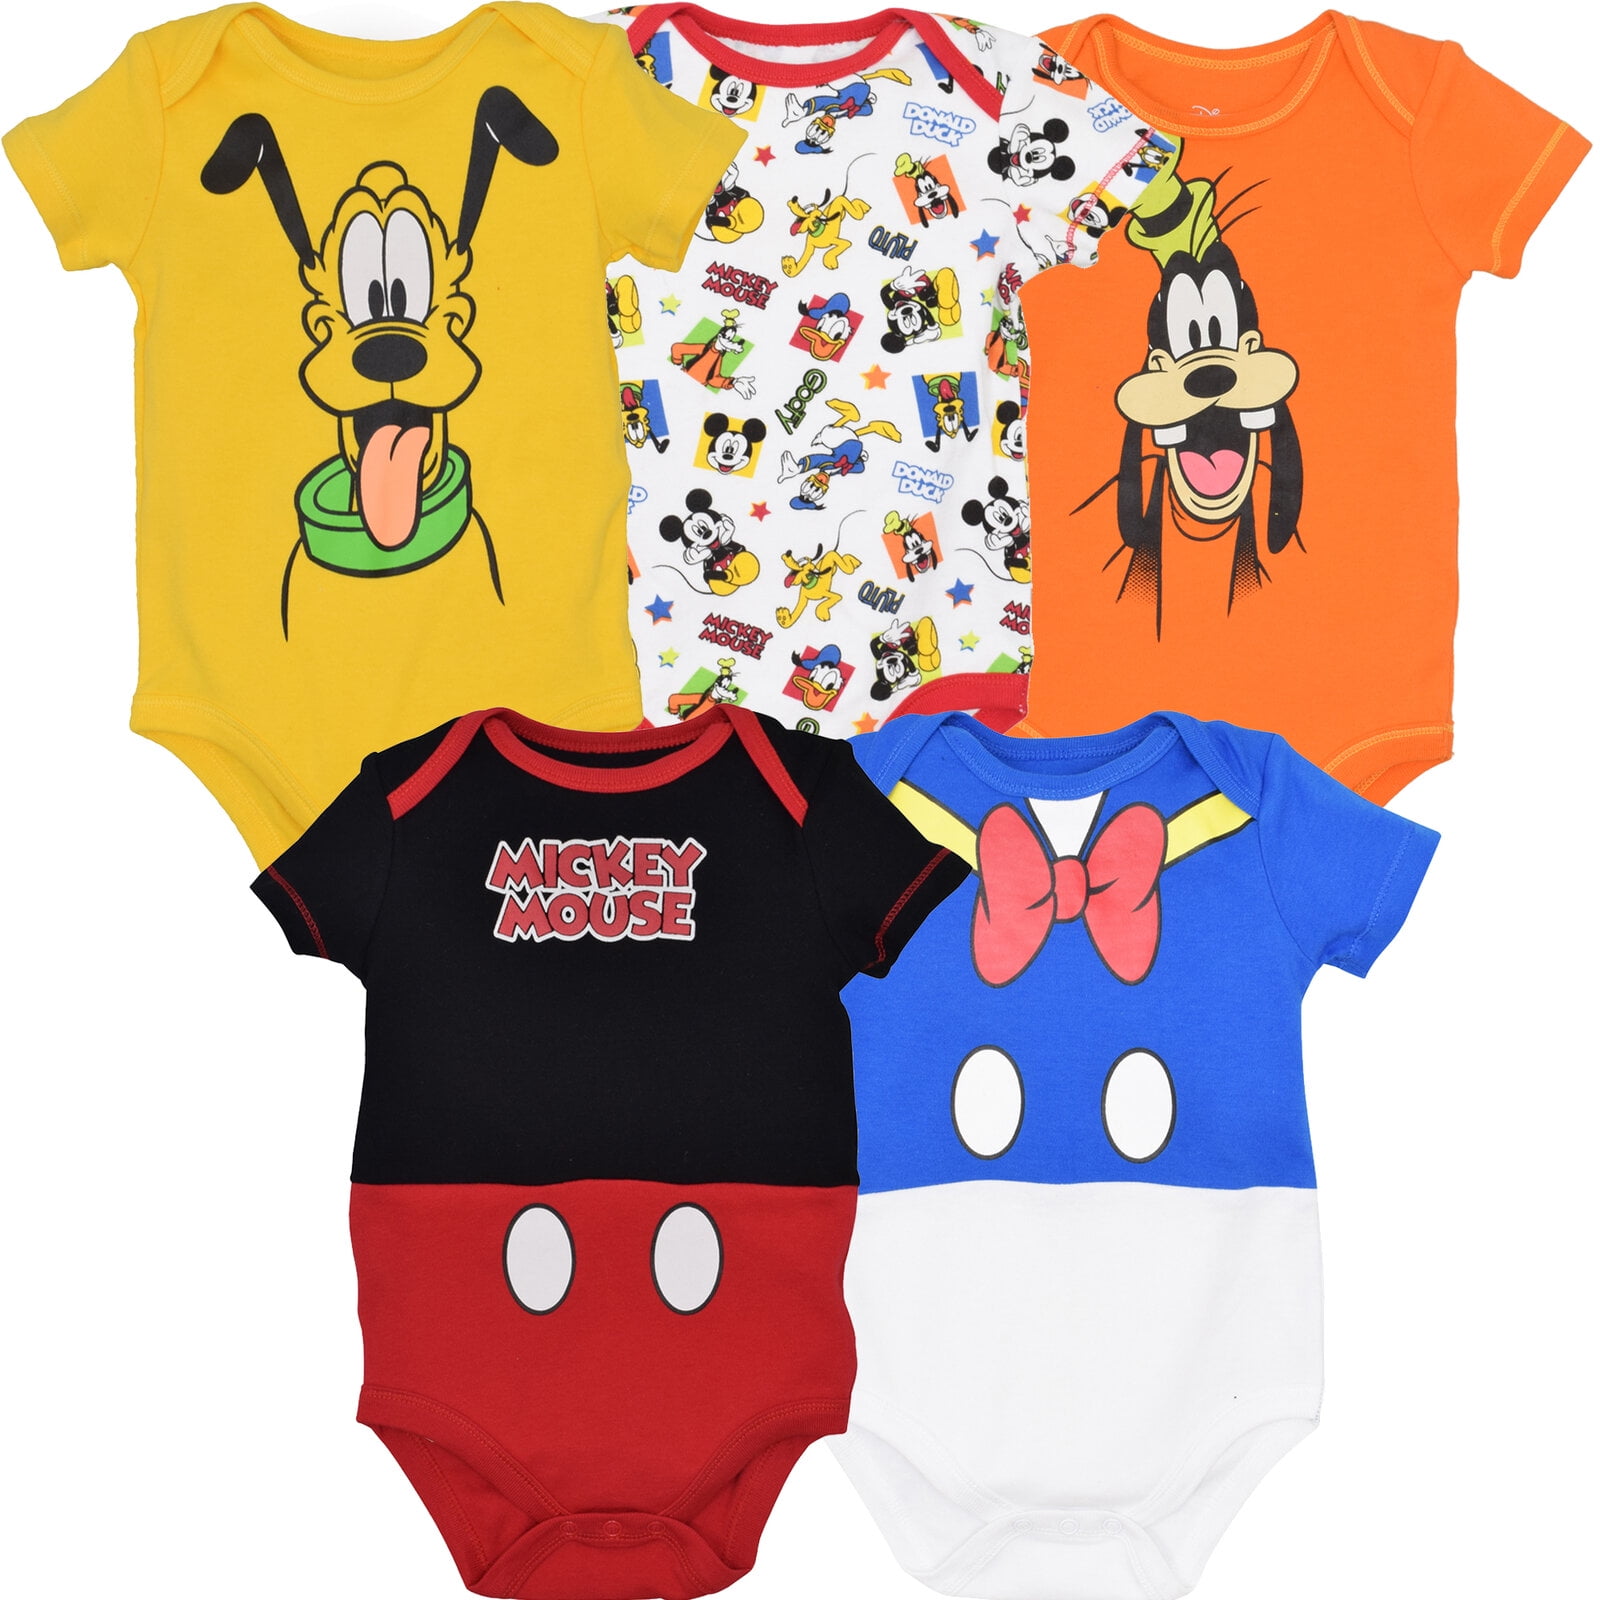 Brand new baby boys Mickey Mouse all-in-one 12-18 months 